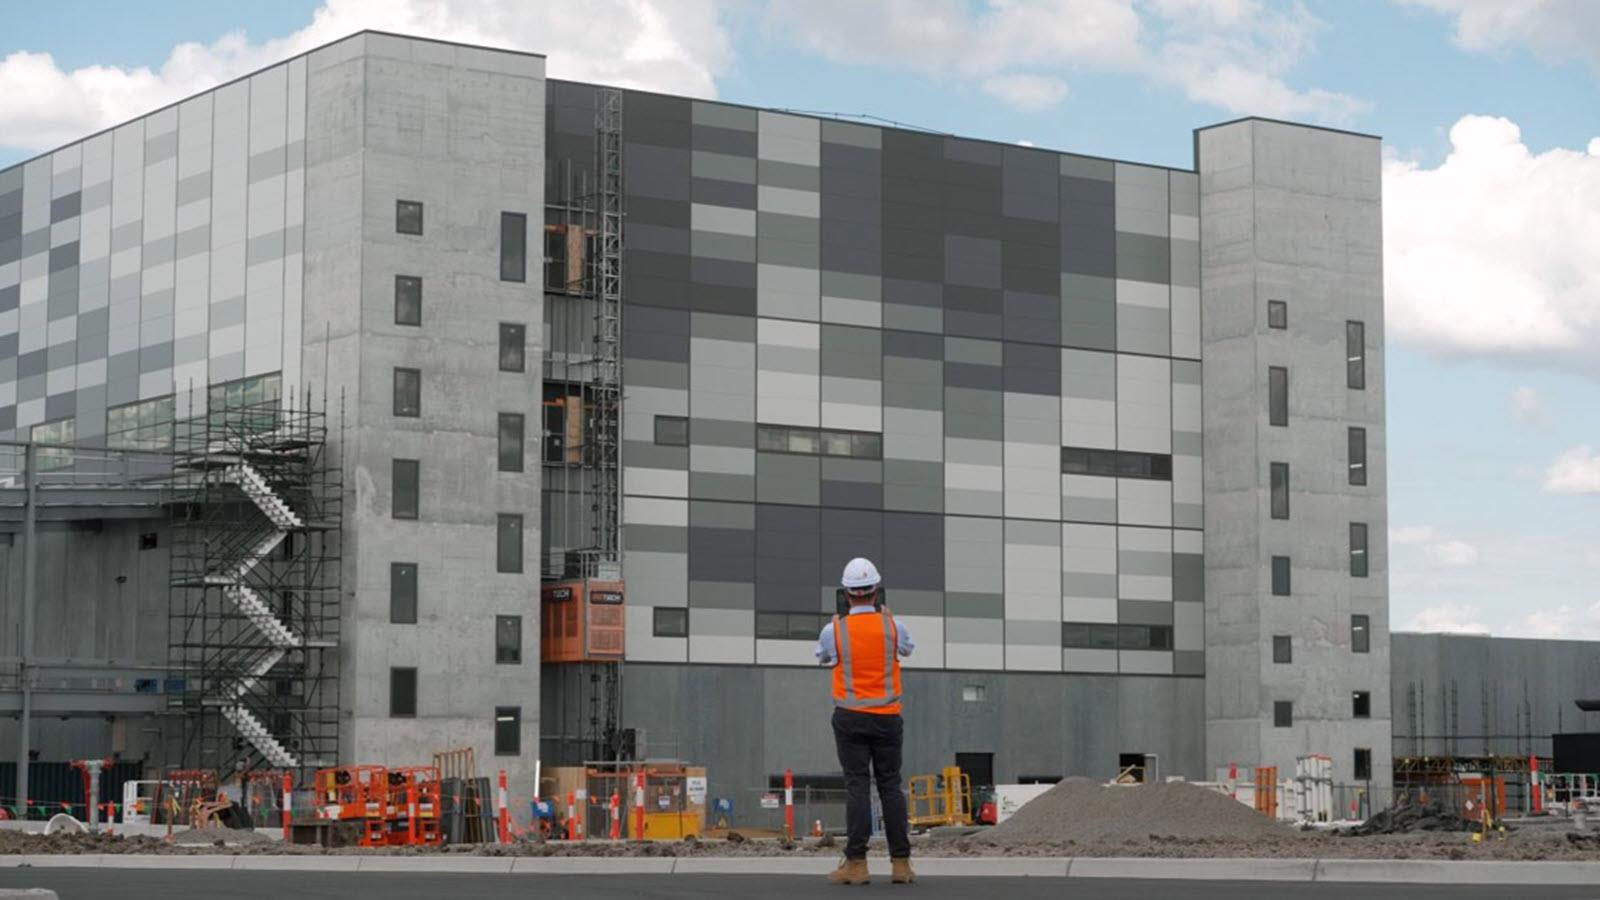 An exterior view of a new CSL Seqirus influenza vaccine and antivenom manufacturing hub under construction in Melbourne, Australia